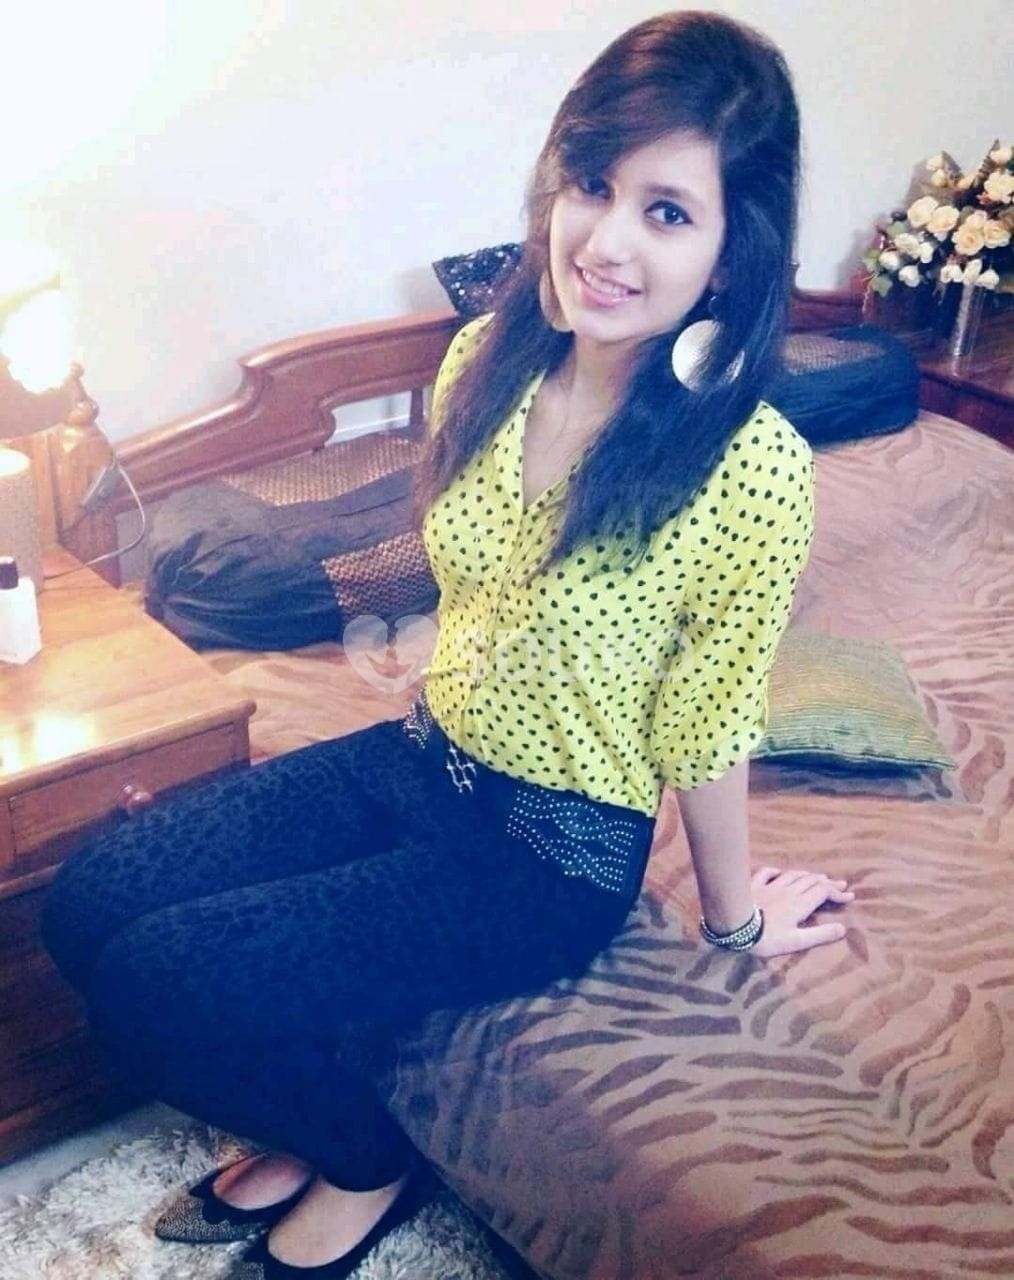 Call girl in chennai self and secure high profile girl available